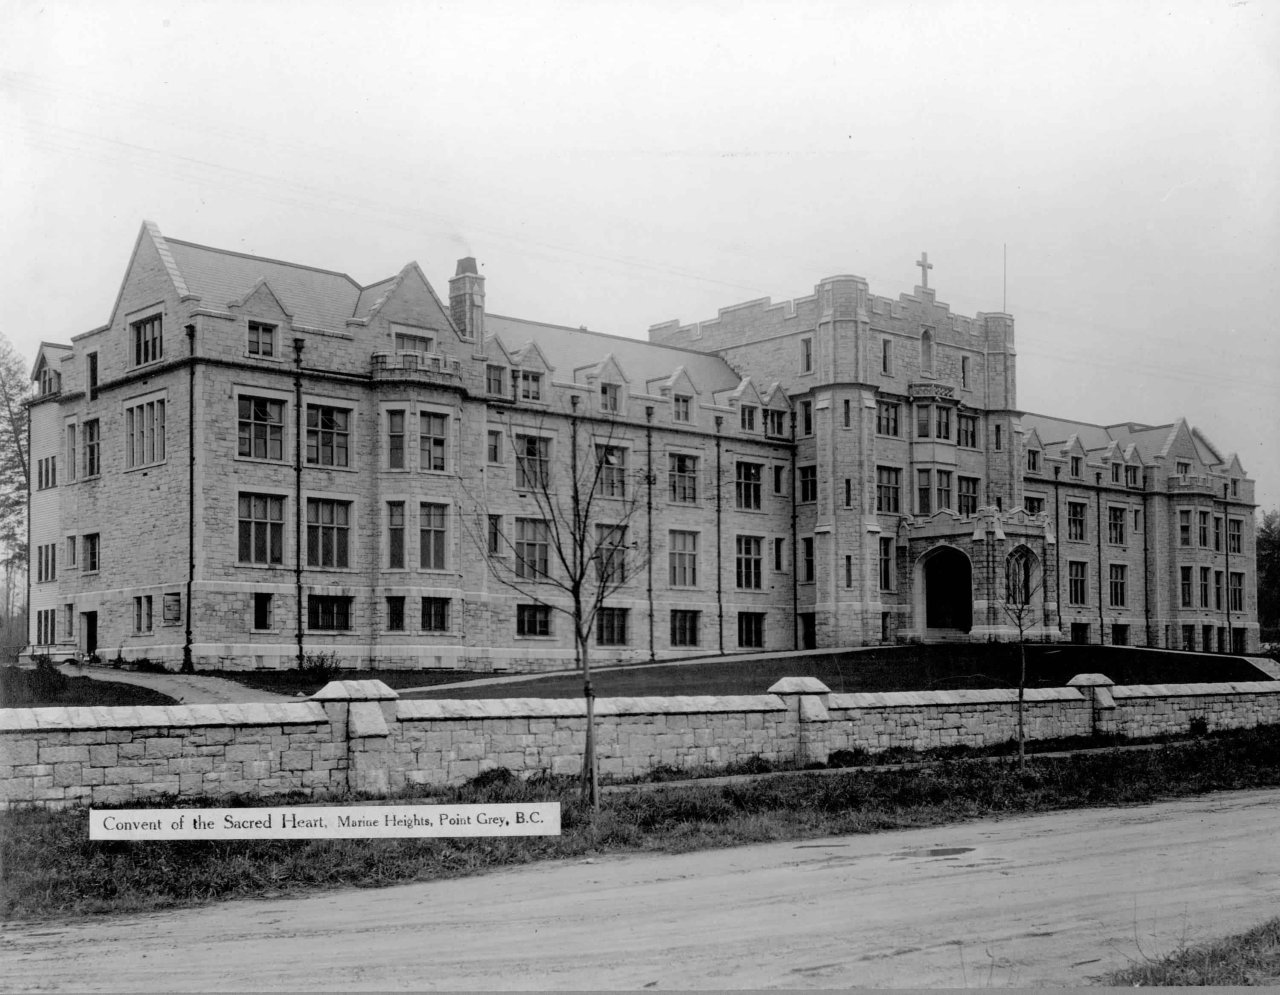 Convent of the Sacred Heart 1925
Source: City of Vancouver Archives Item : CVA 805-276 - Convent of the Sacred Heart, Marine Heights, Point Grey, B.C. [later St. George's School]